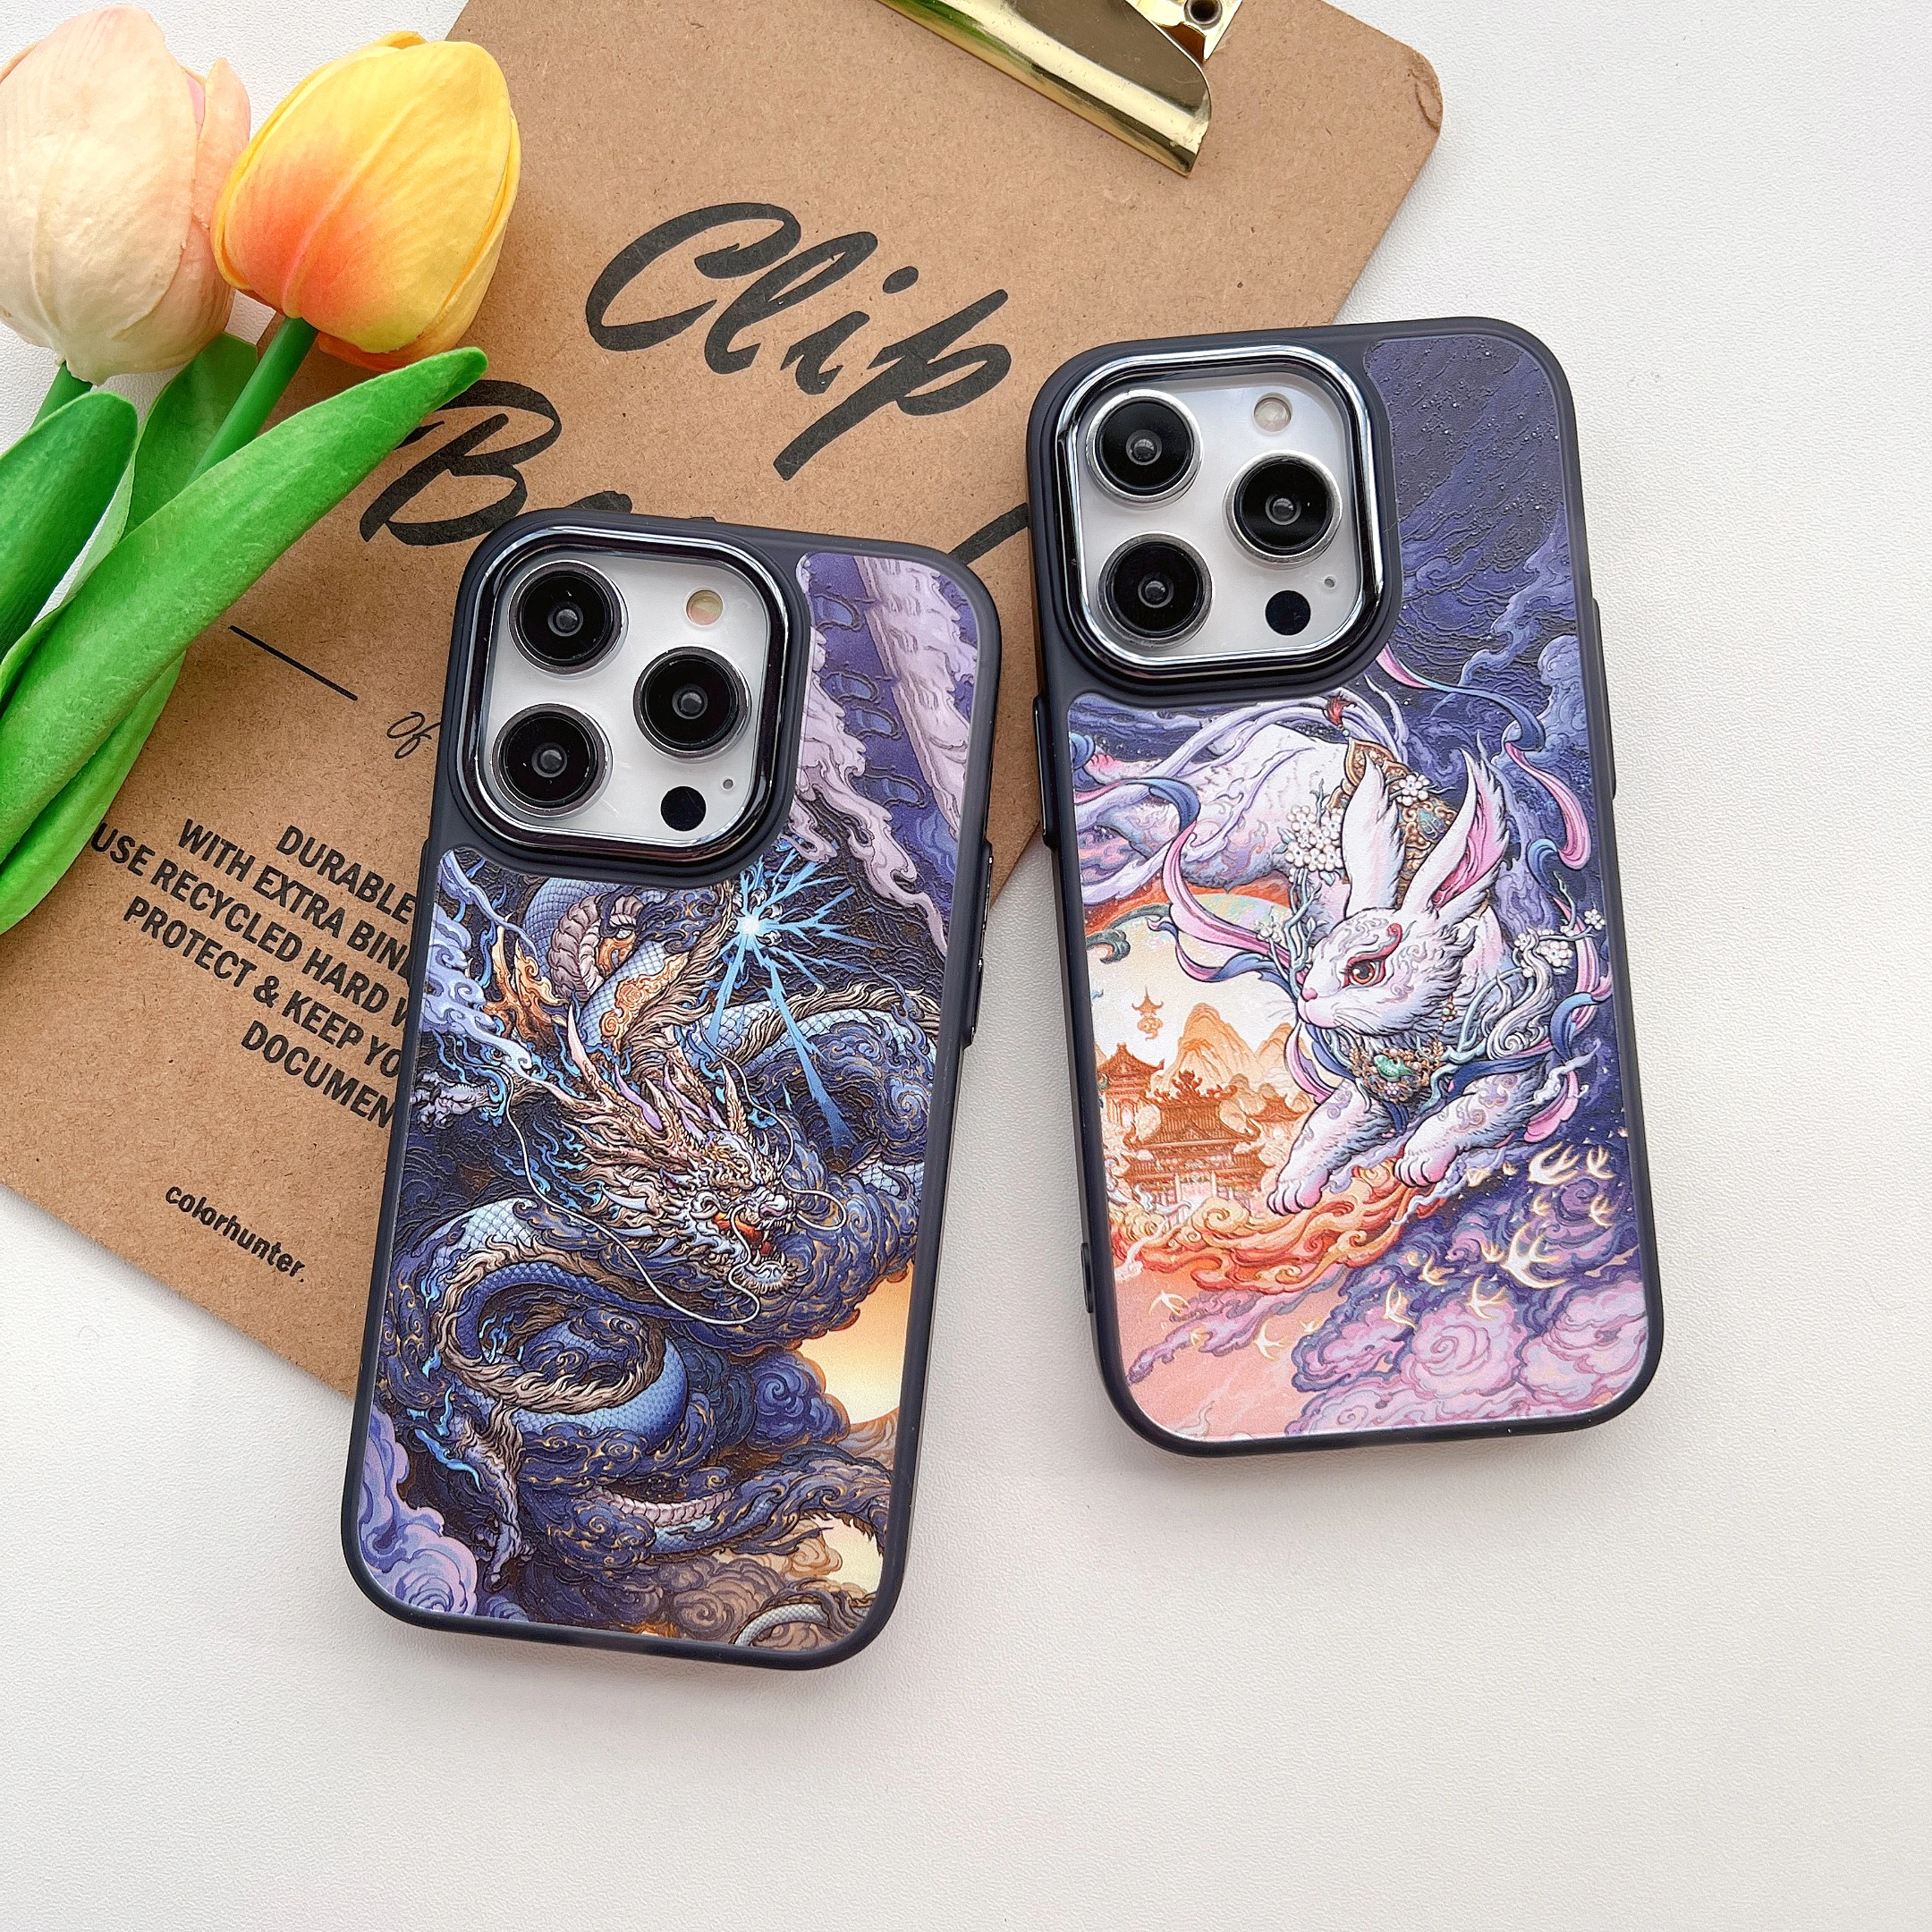 

Twelve Chinese Zodiac Signs Phone Case For Iphone 12 13 14 Pro Max 14 Plus China Elements Phone Cover For IPHON 12 13 14 Promax